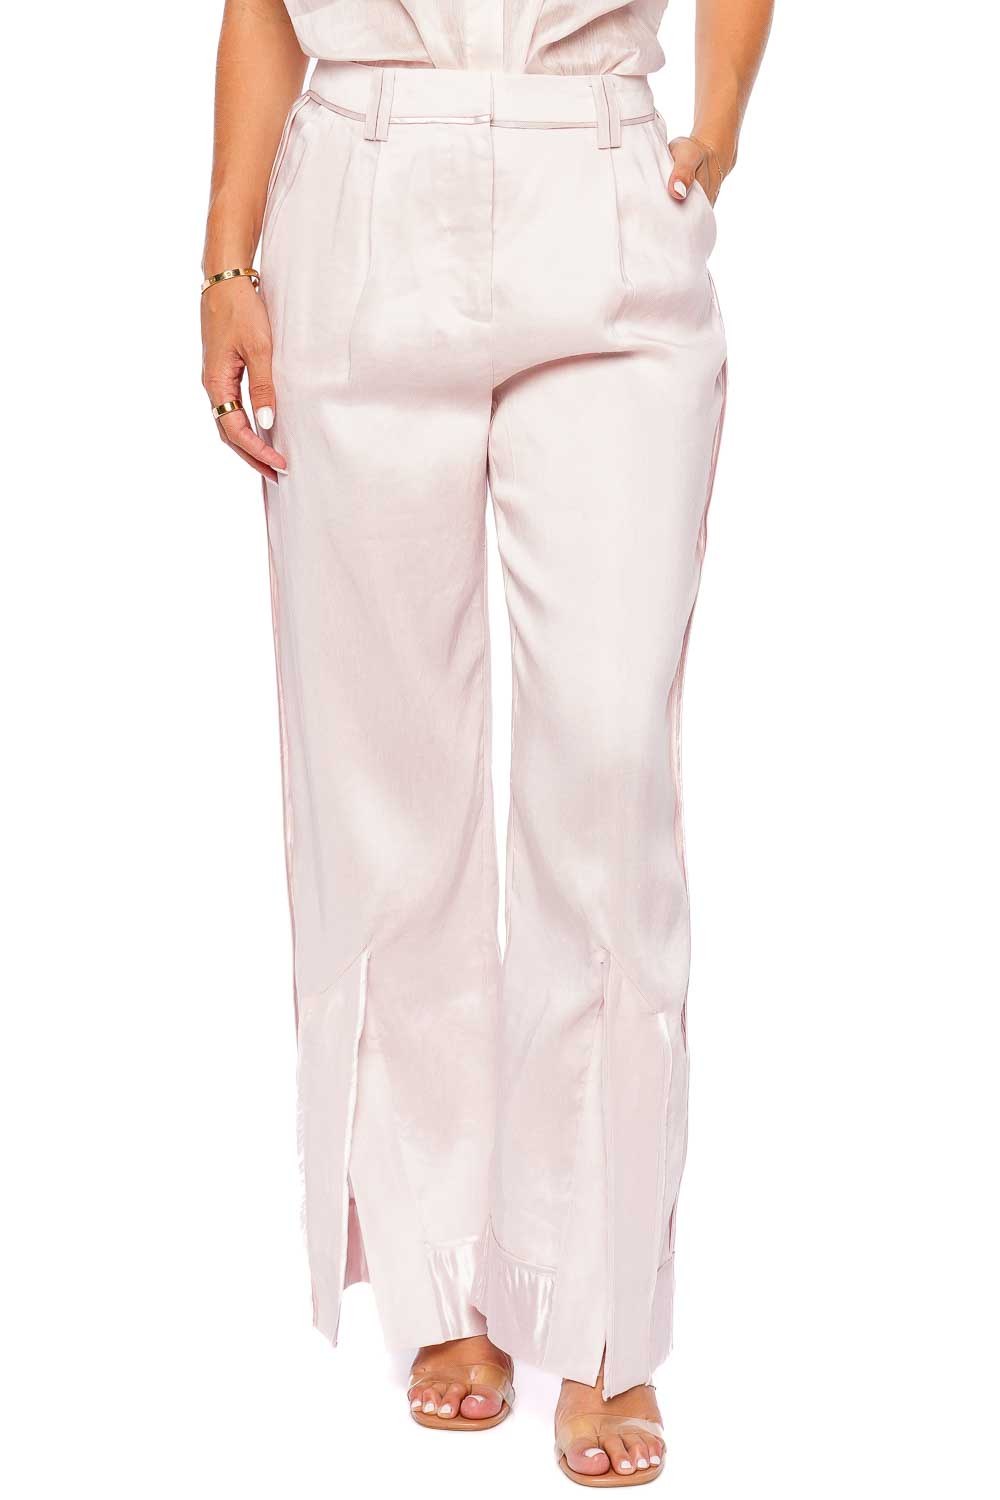 Aje. Insight Deconstructed Pant 24RE3097 SOFT PINK